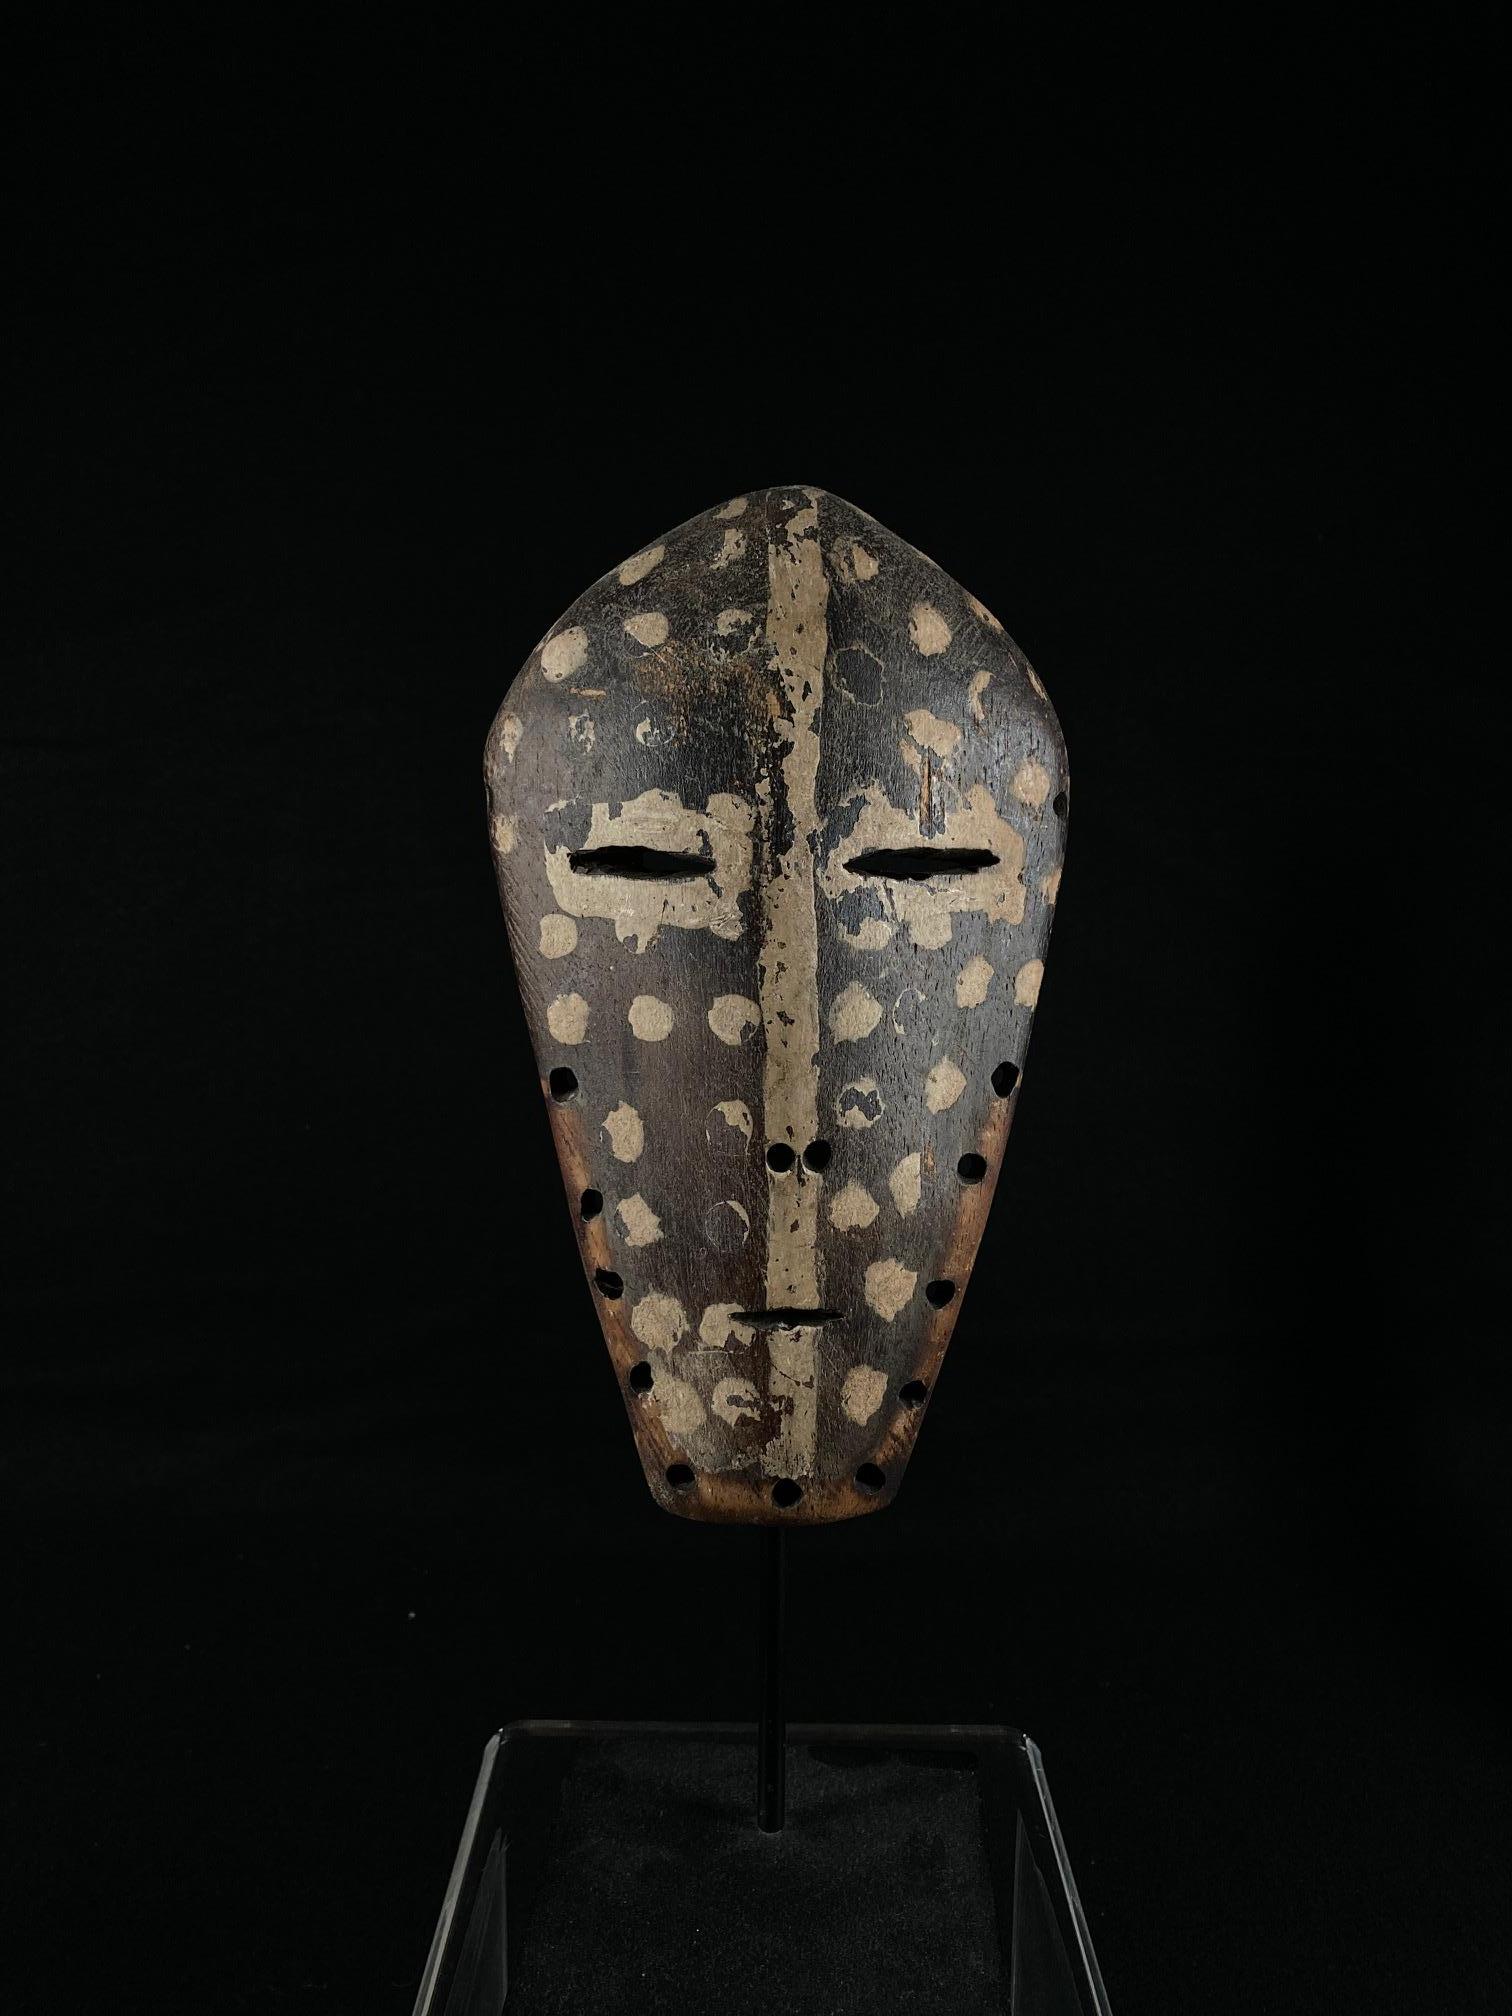 Lengola mask adorned with natural pigment, from Democratic Republic of the Congo, Africa. Ex California private collection. Mounted on a custom metal display stand.